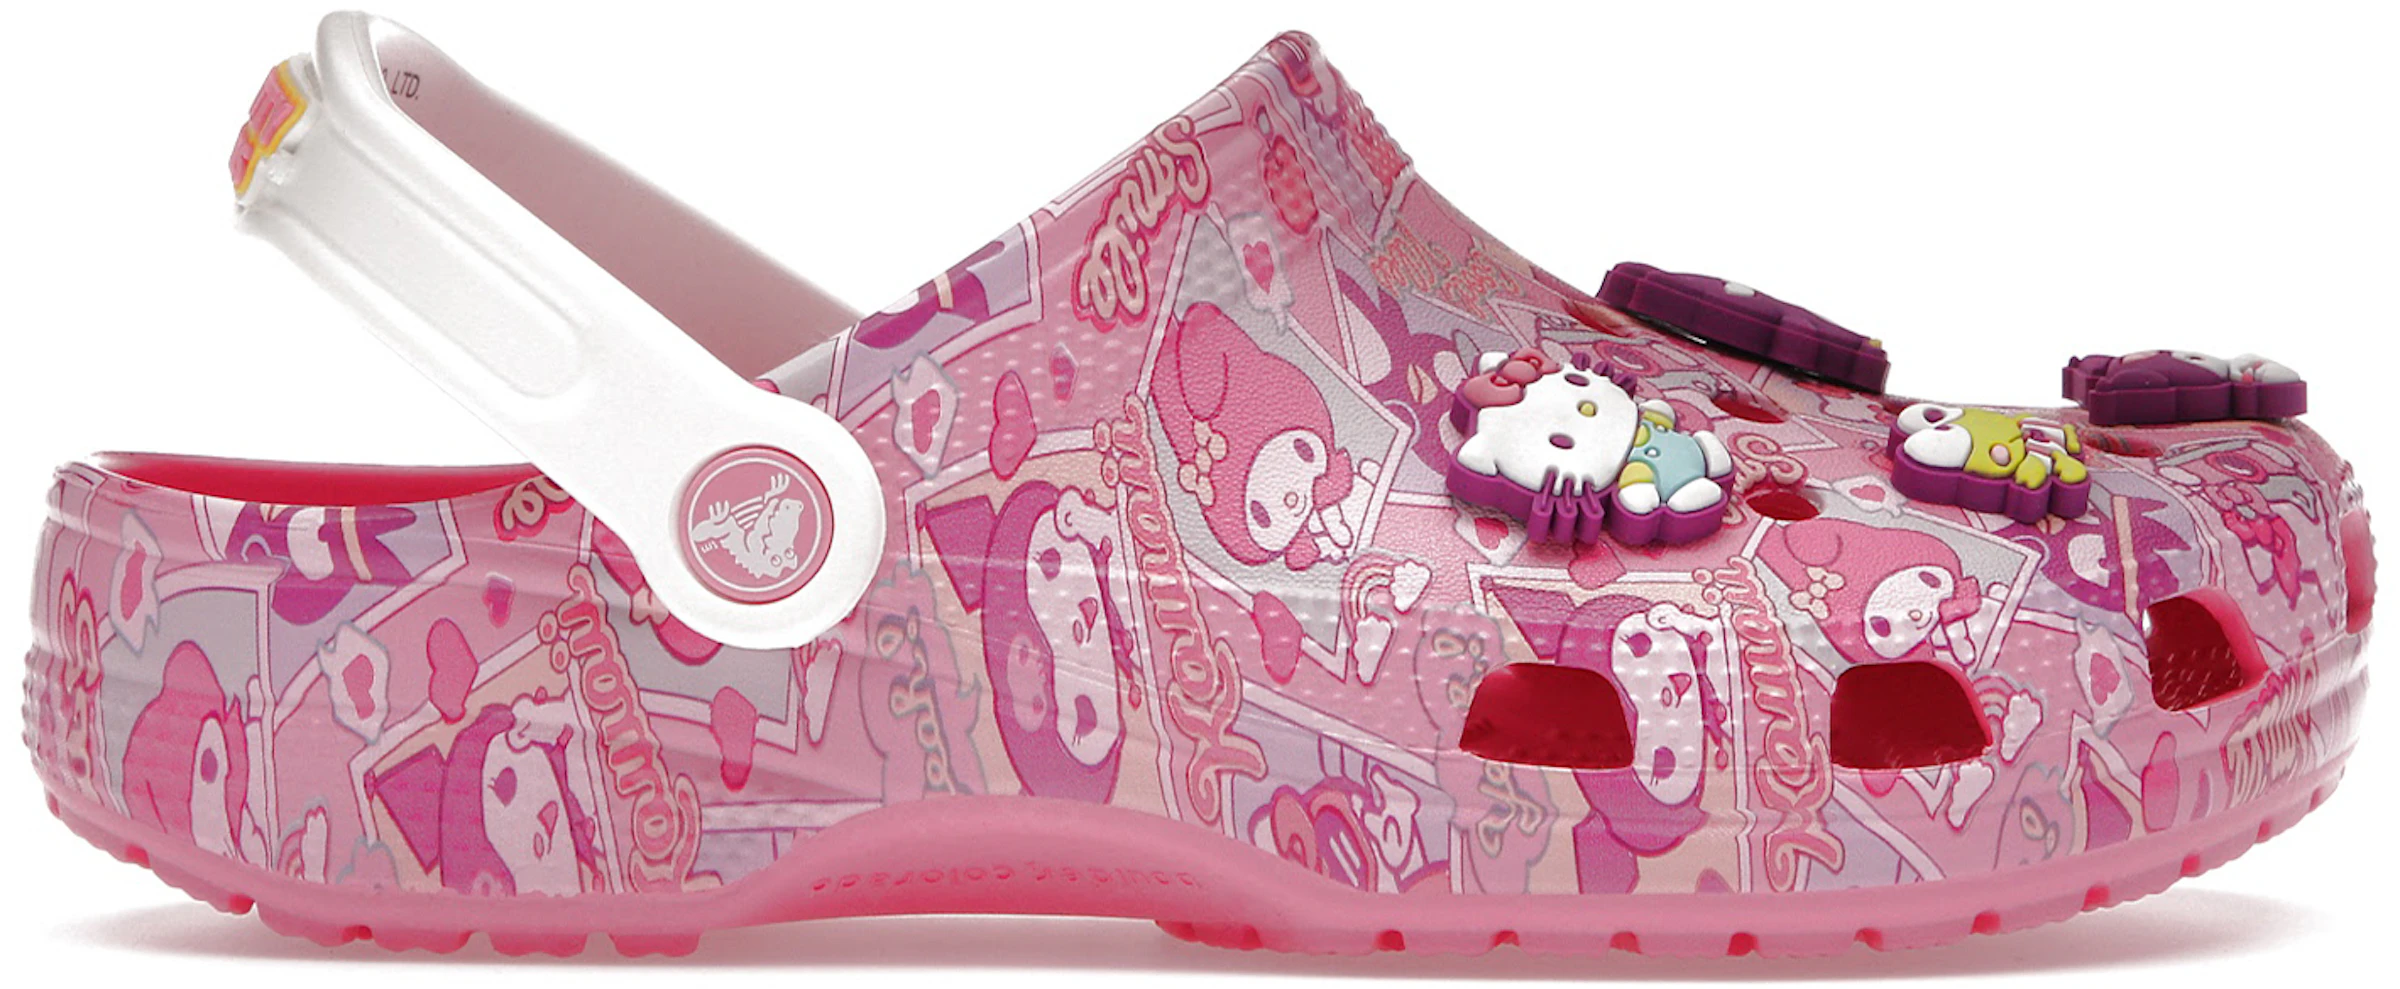 Crocs Classic Clog Hello Kitty and Friends - 208527-680 - US